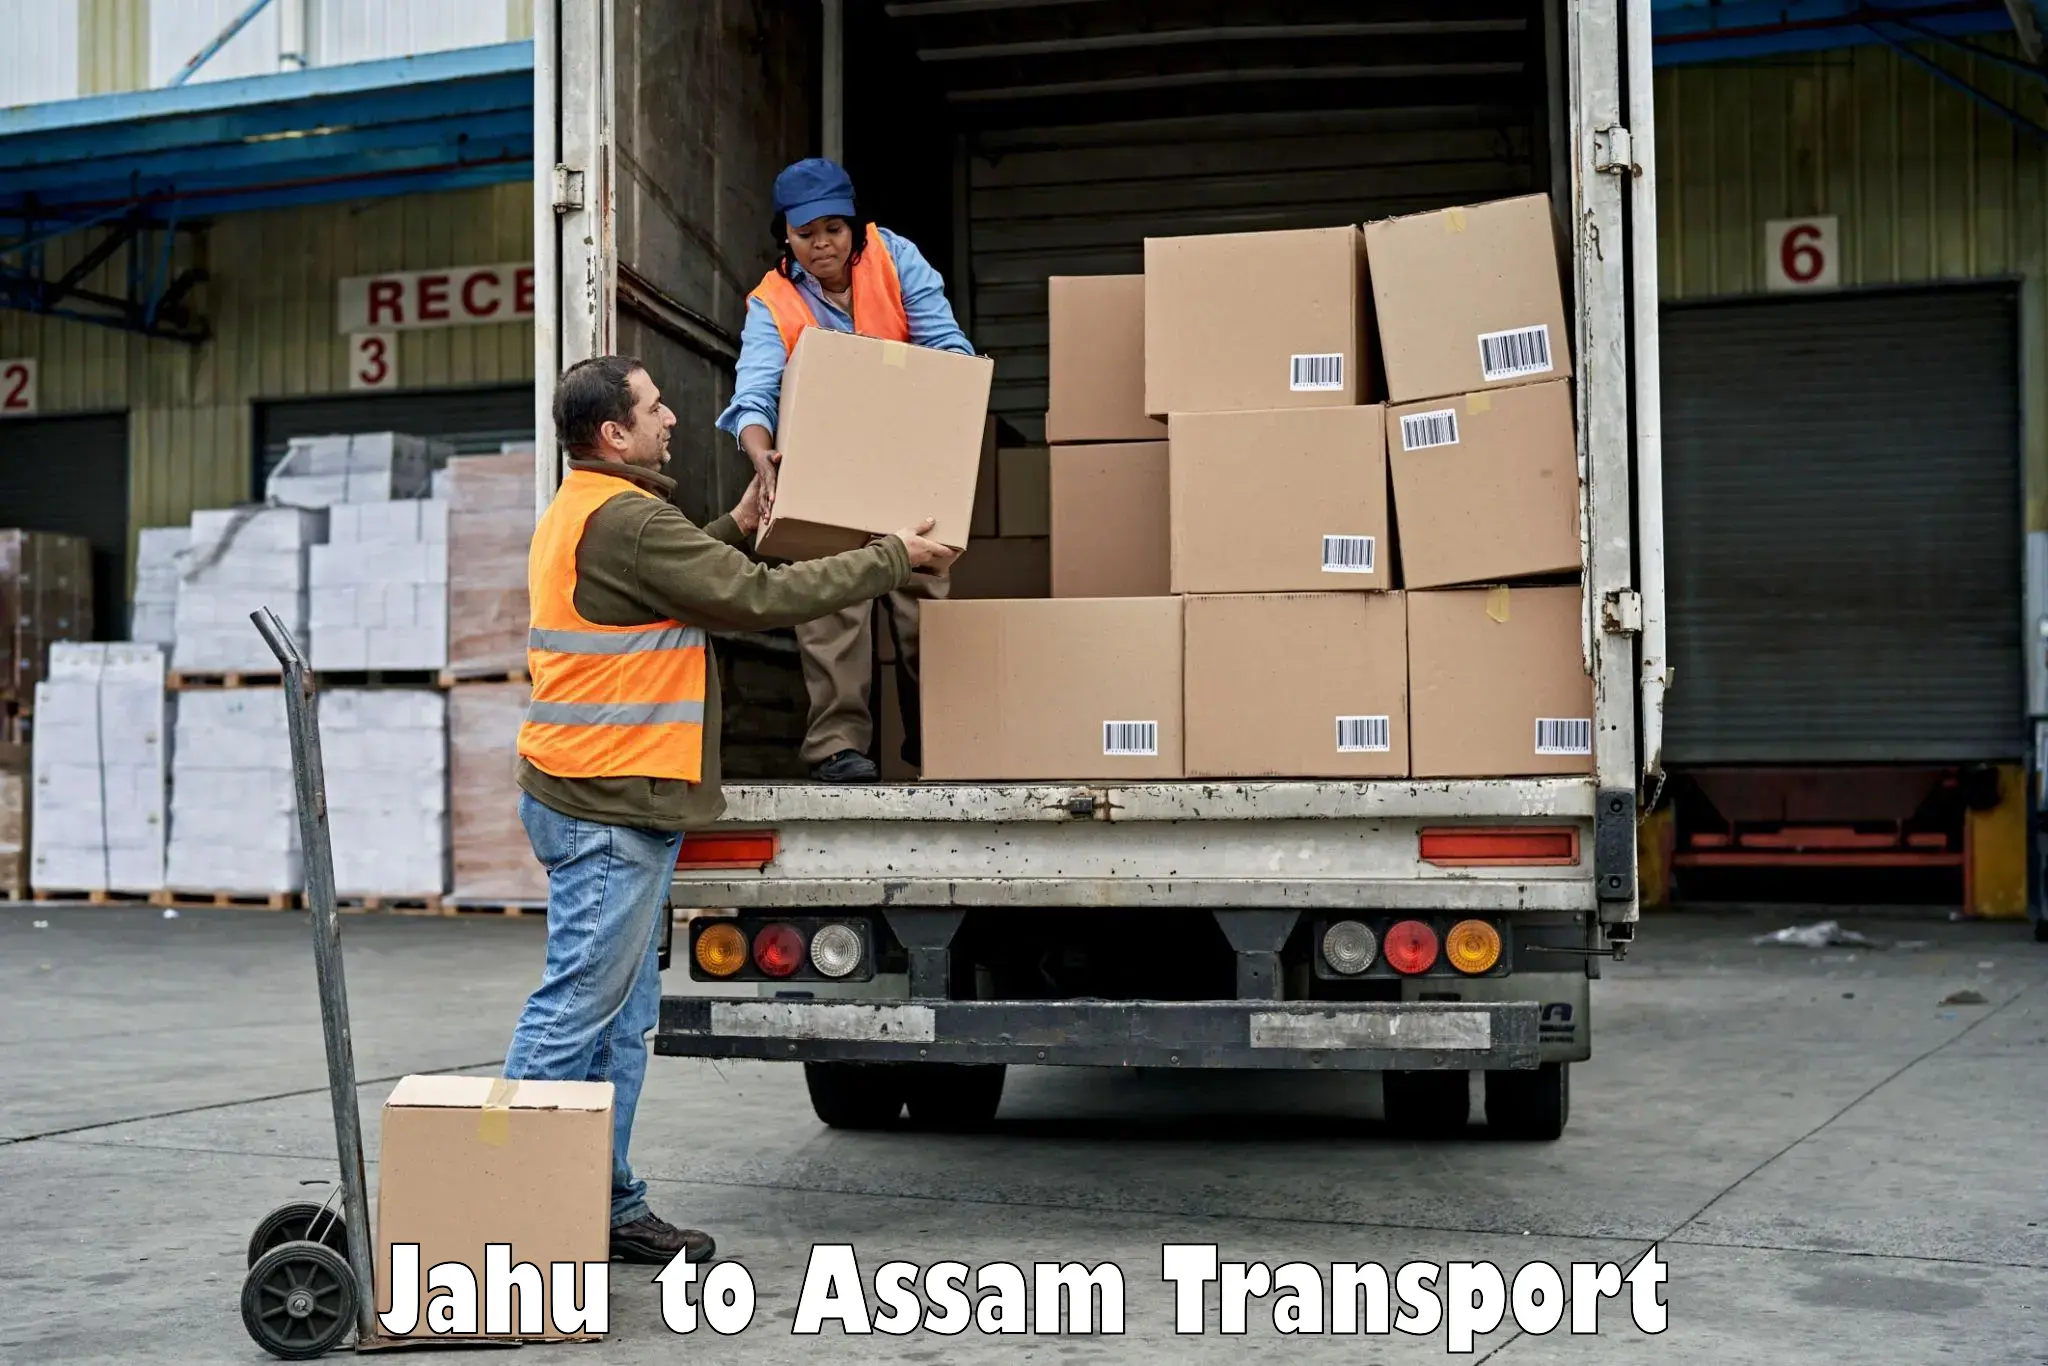 Transport in sharing Jahu to Rupai Siding